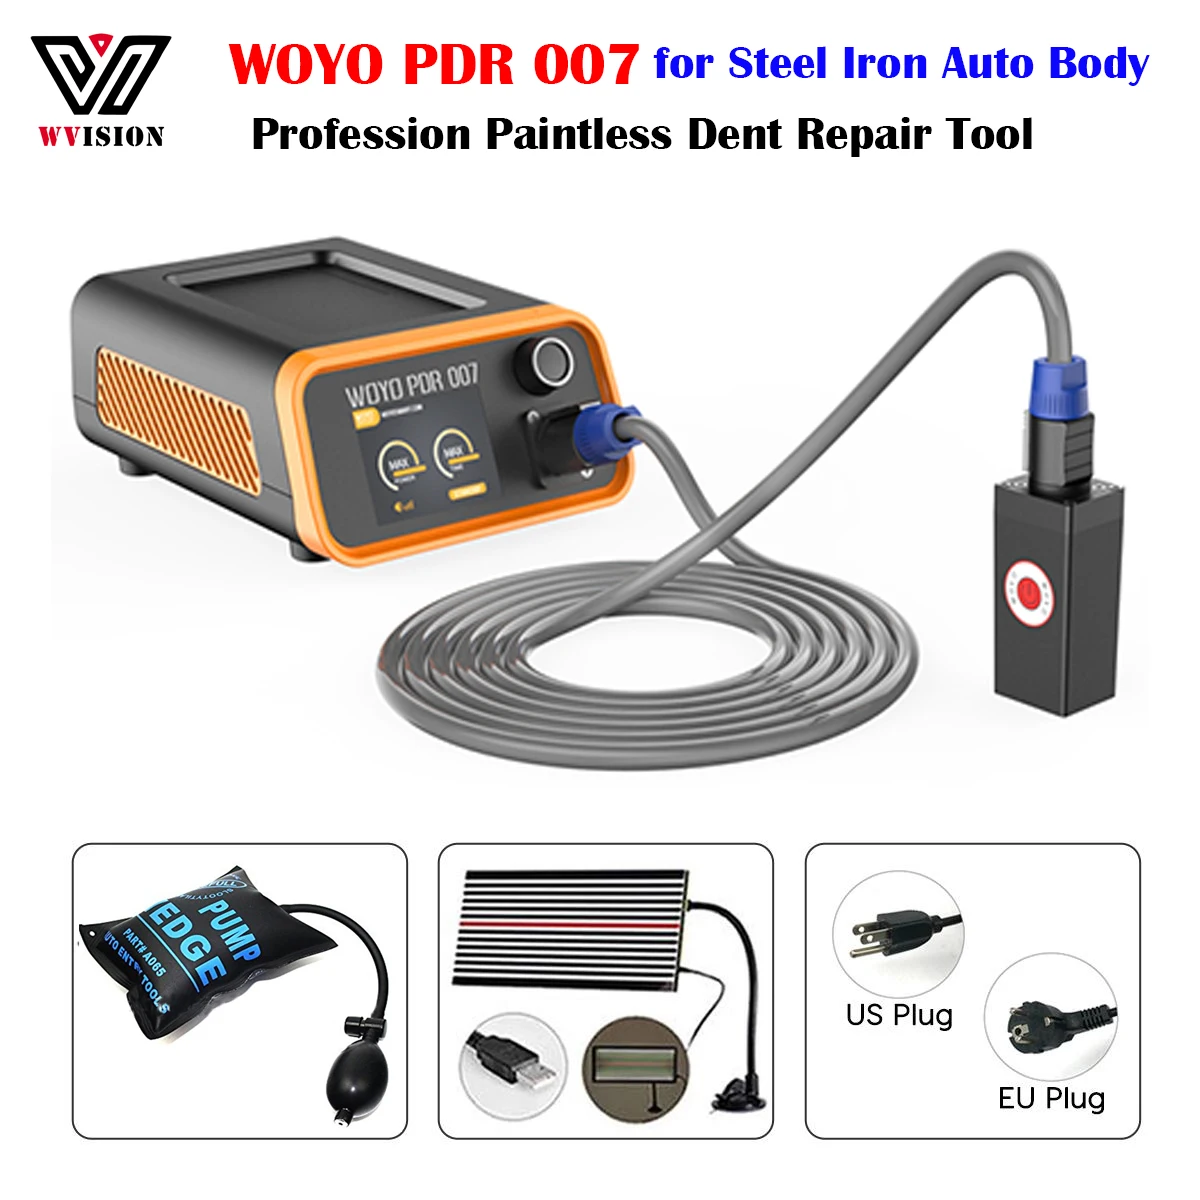 

PDR007 Car Paintless Dent Repair PDR Steel Body Magnetic Induction Heater Automotive Mechanical Workshop Tools Car Accessories